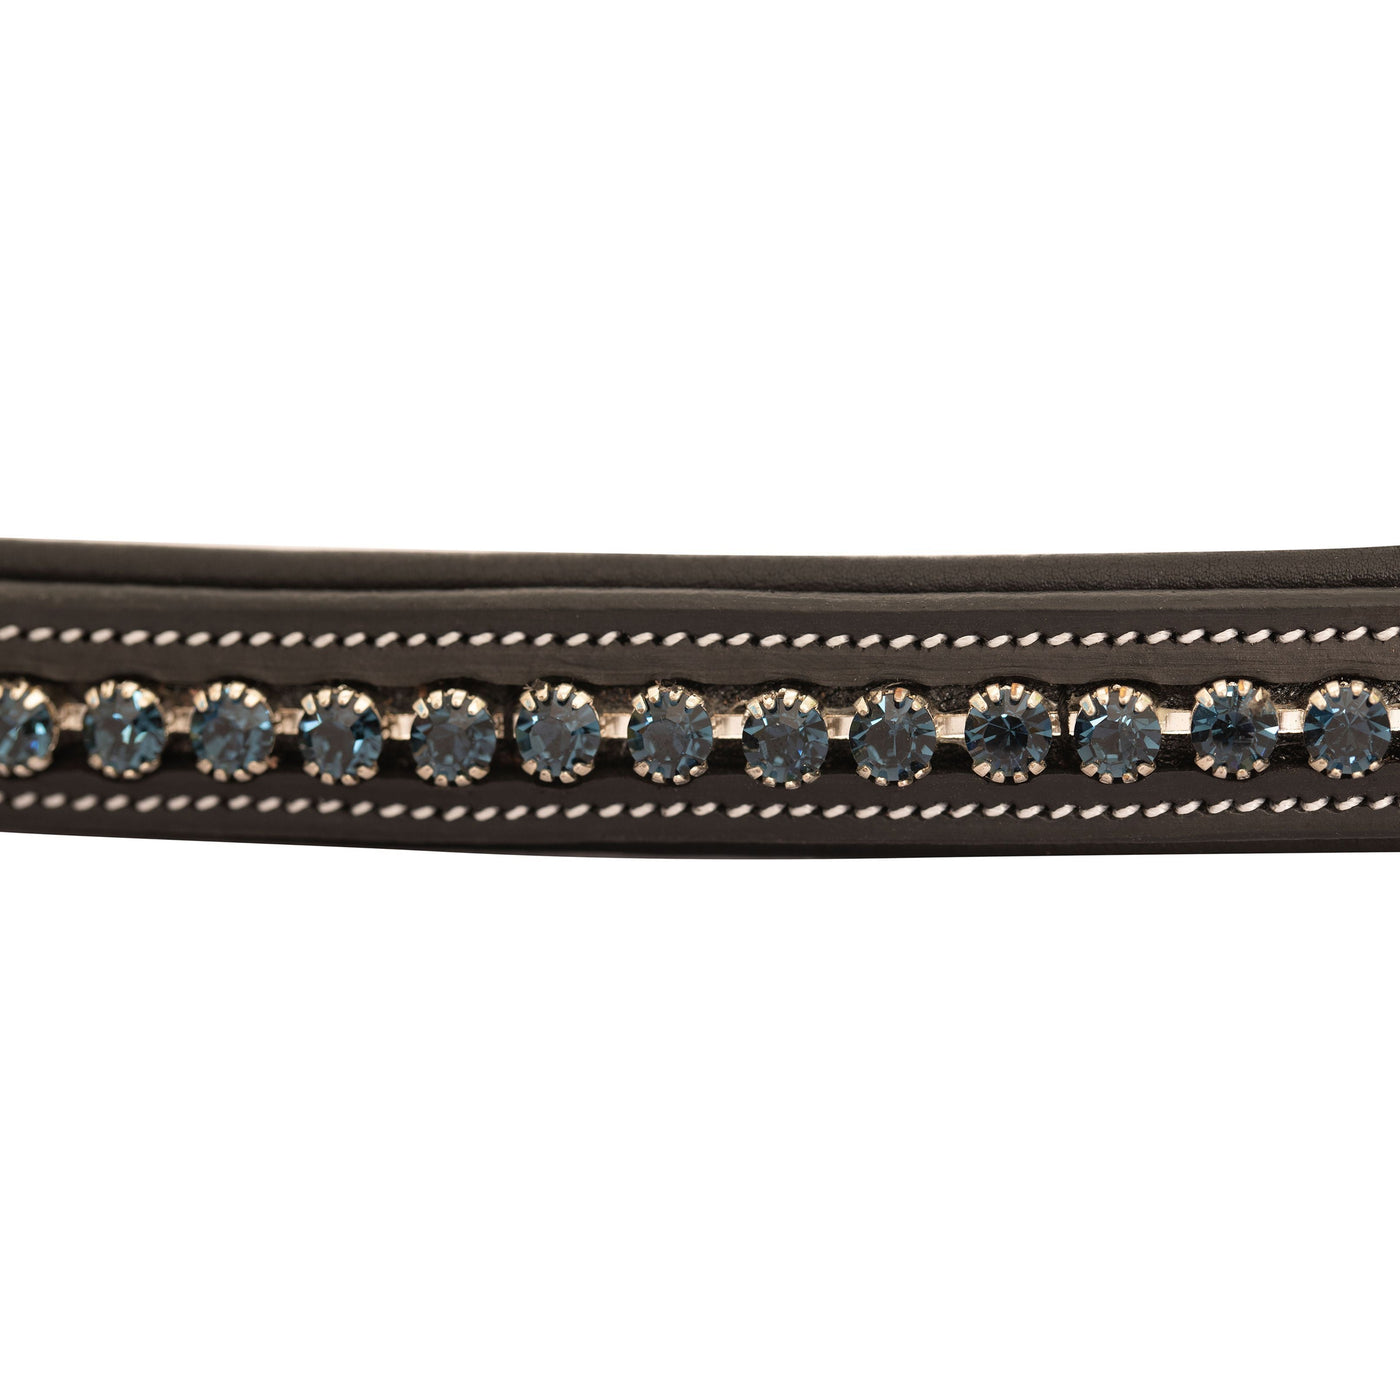 ExionPro Small Glittery & Fancy Blue Crystal Browband